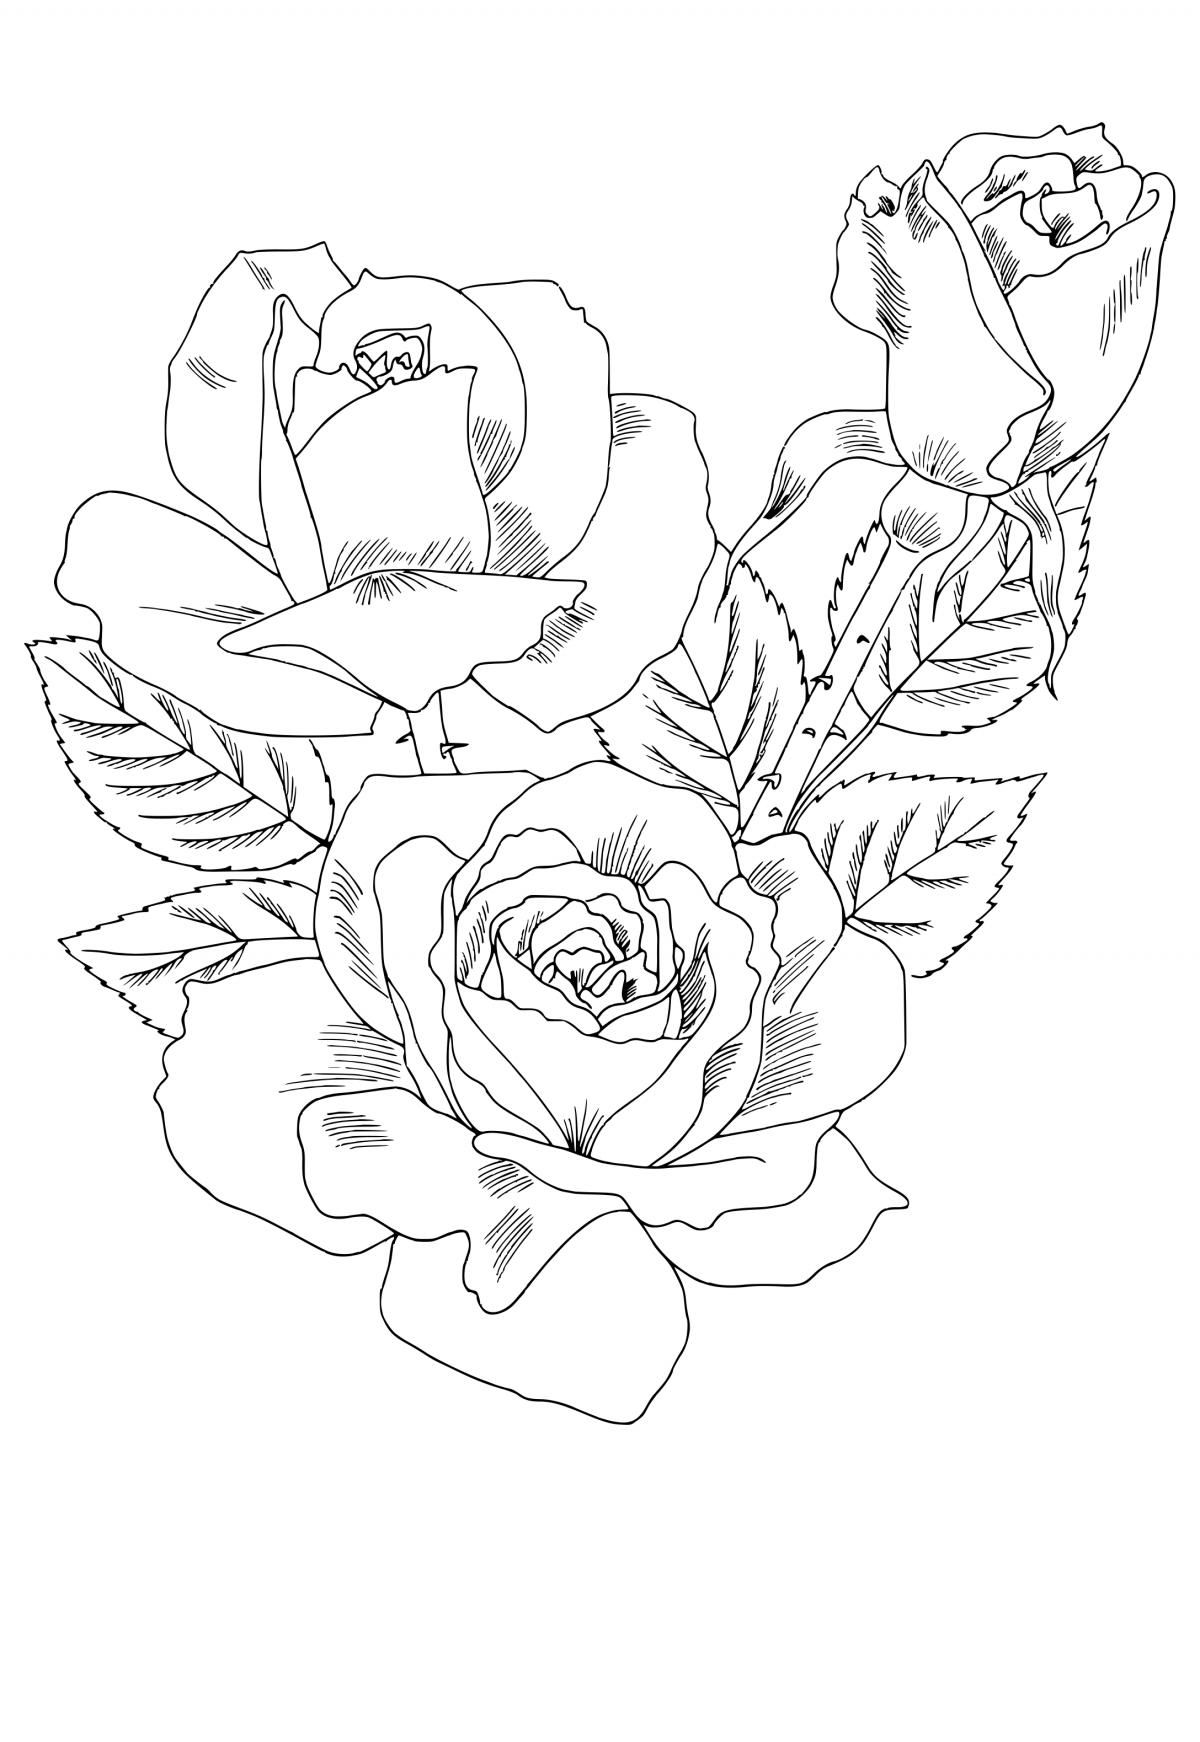 free printable coloring pages of roses